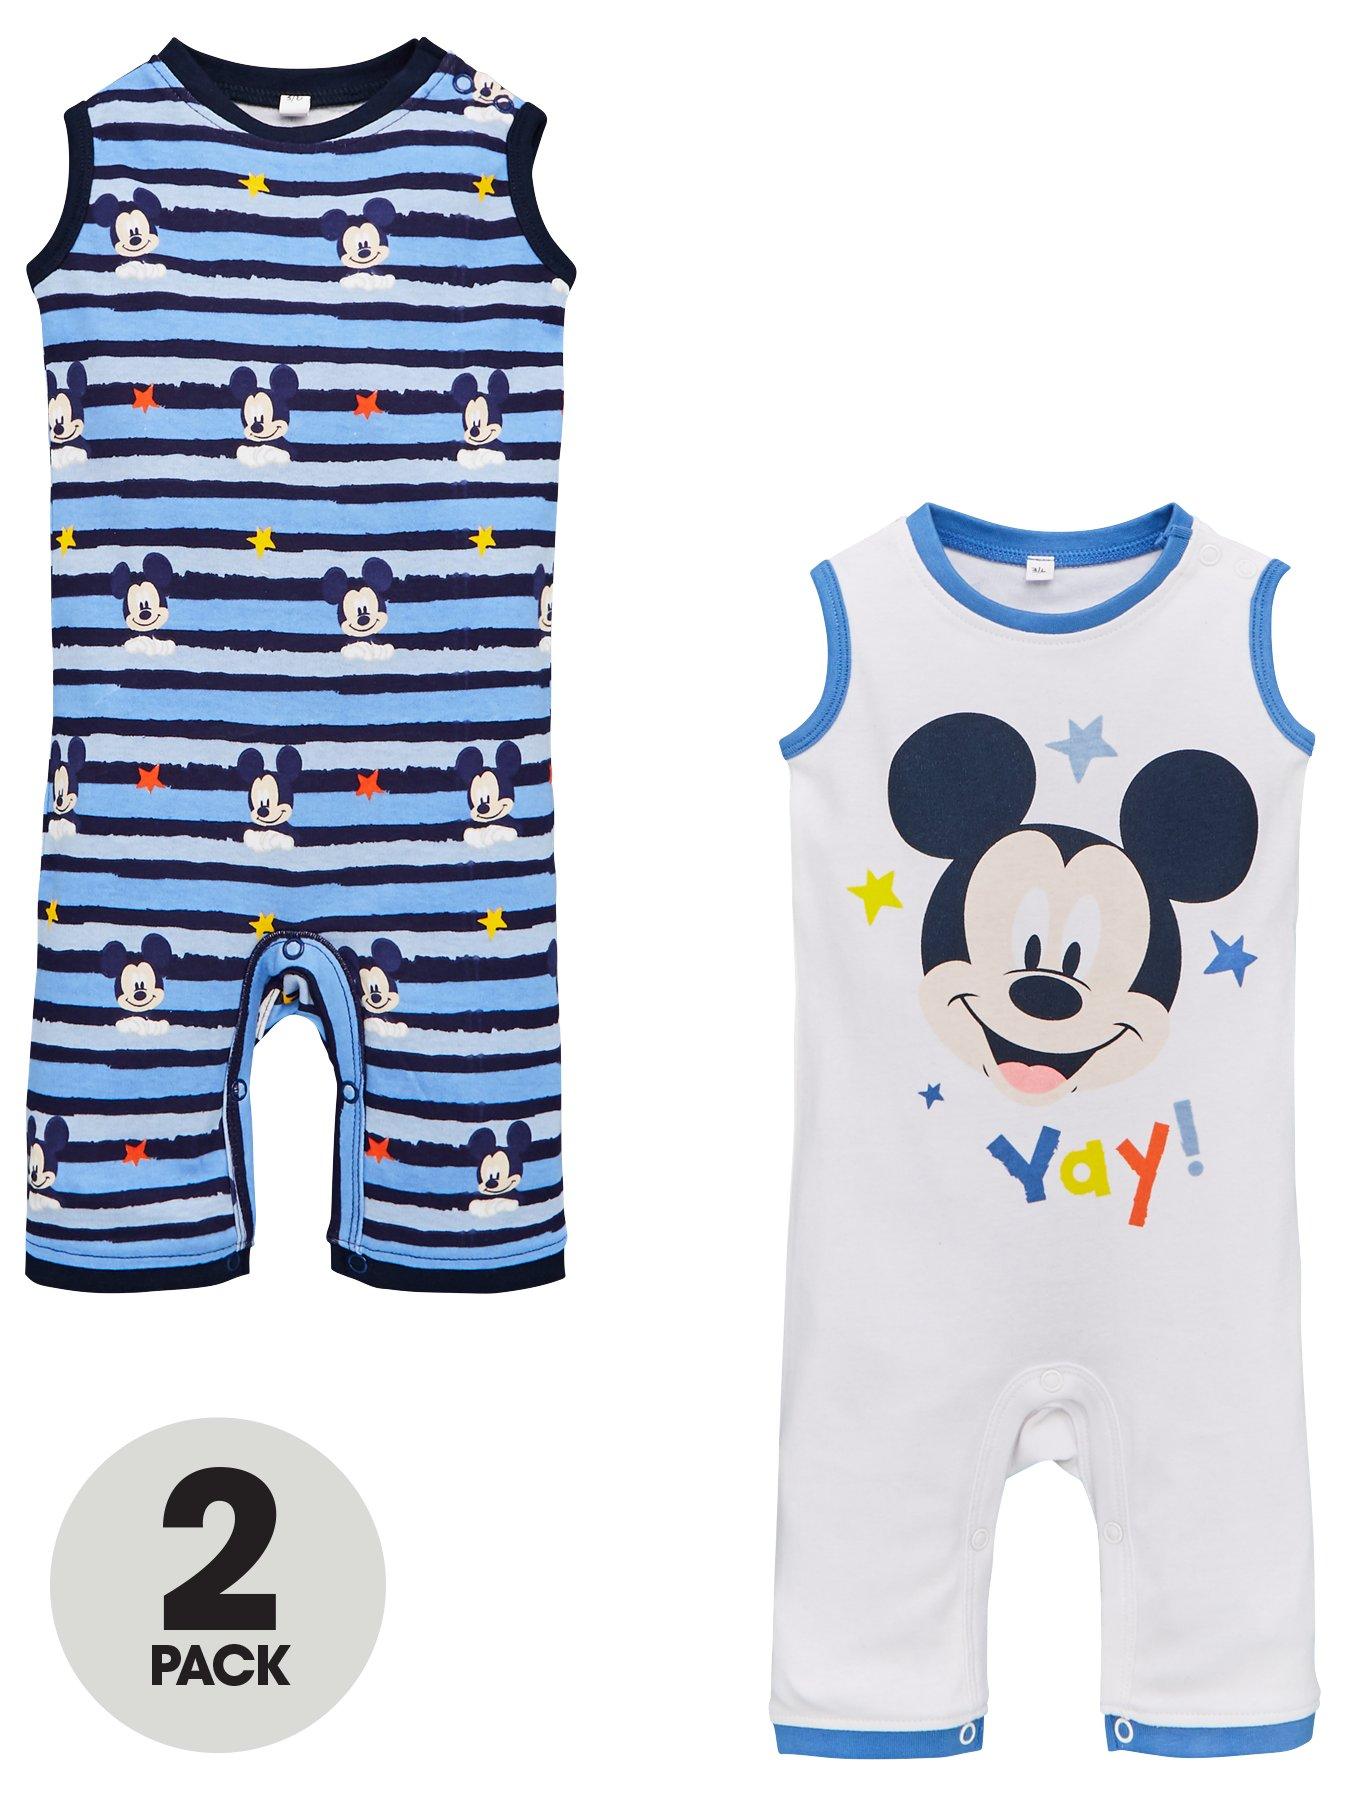 mickey mouse baby clothes uk